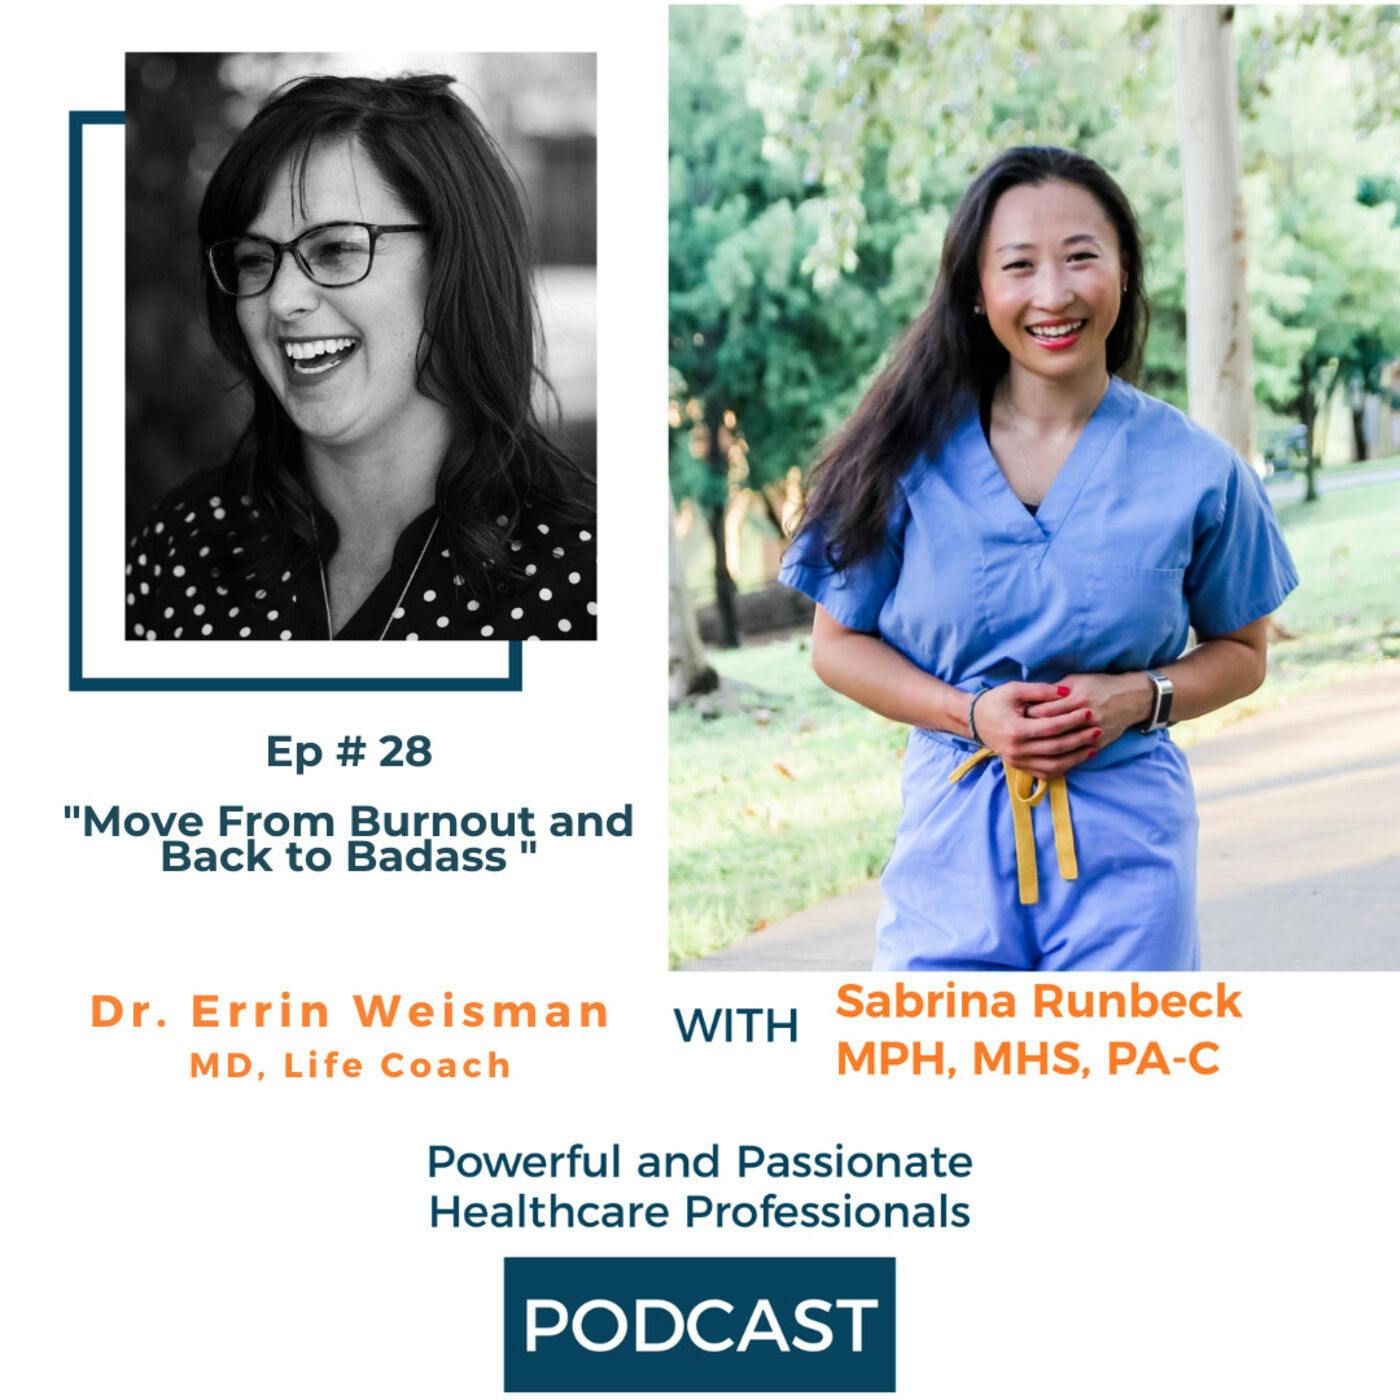 Ep 28 – Move from Burnout and back to Badass with Dr. Errin Weisman D.O